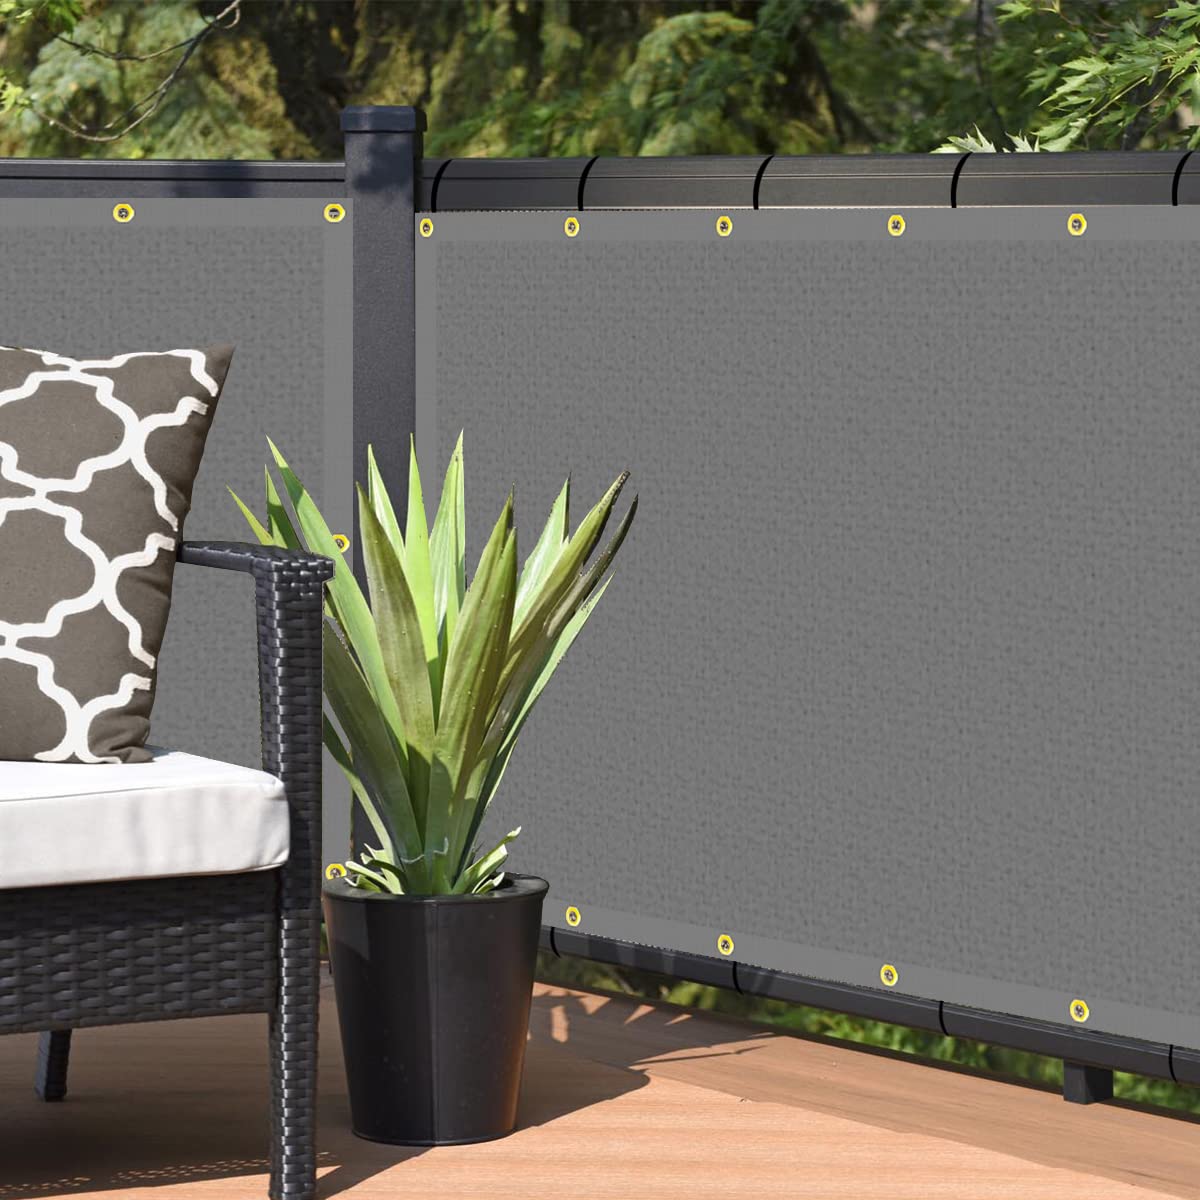 Vocray 3' x 16' Light Grey Balcony Privacy Screen Fence Cover UV Resistant Protection Heavy Duty for Deck, Patio, Backyard, Railing Shield, Cable Ties Included, 90%